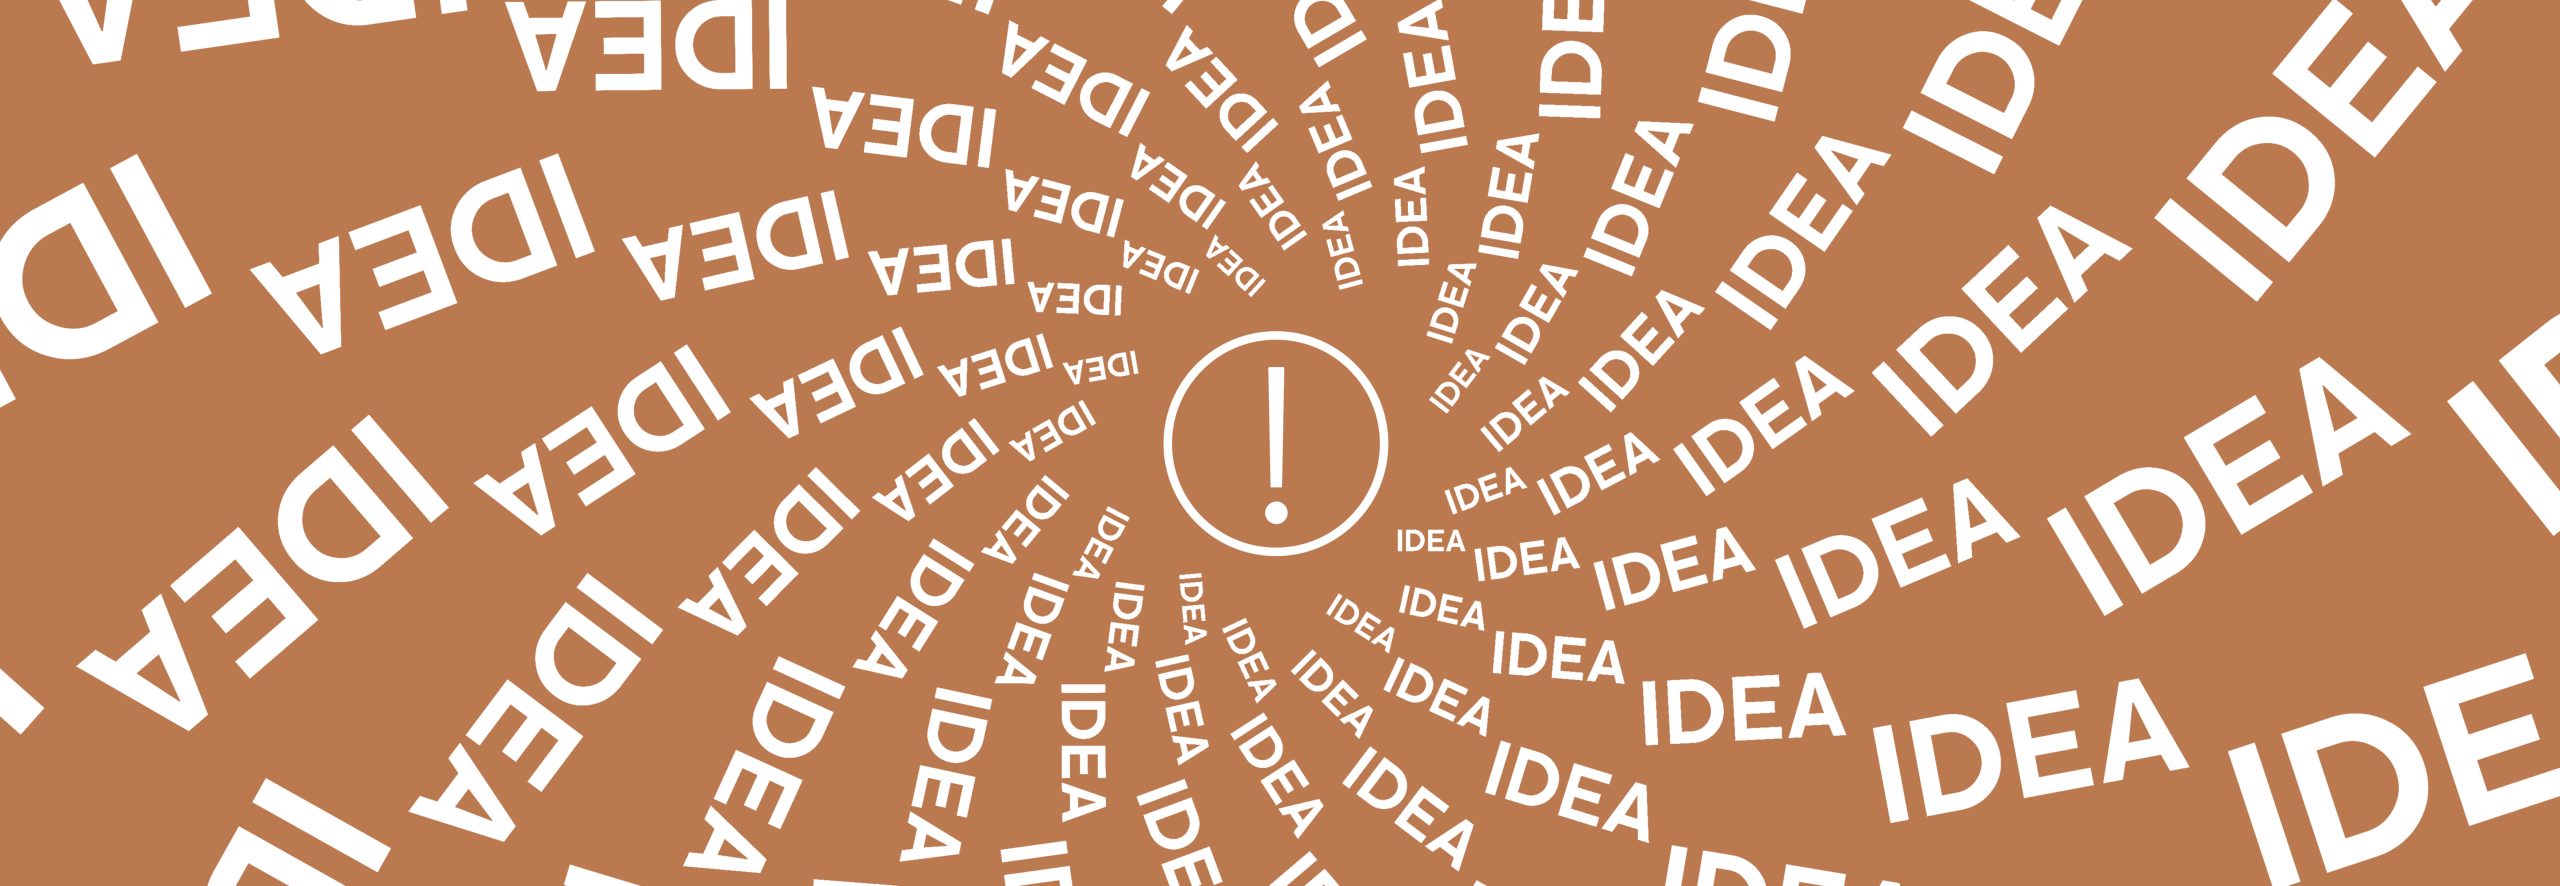 Exclamation mark with 'idea' written around it